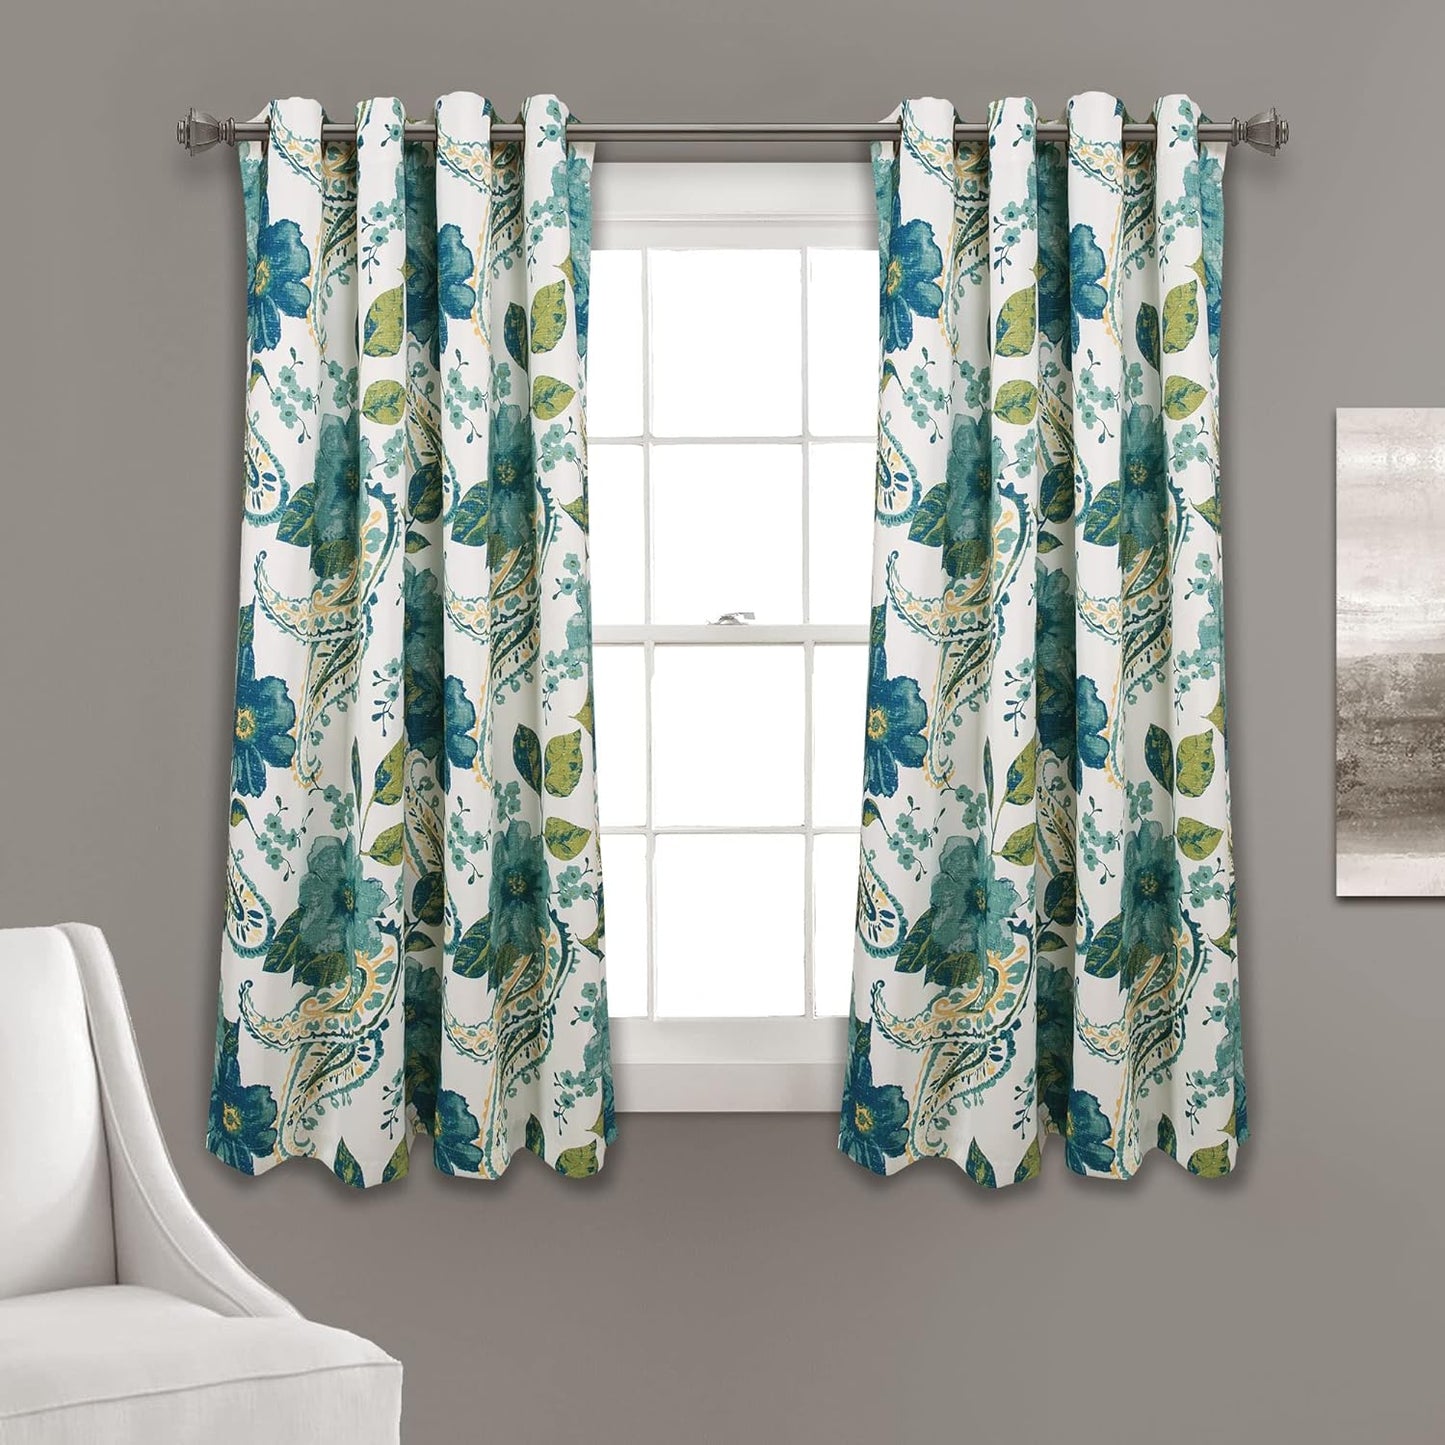 Lush Decor Floral Paisley Light Filtering Window Curtain Panel Pair, 52"W X 84"L, Blue  Triangle Home Fashions 52"W X 45"L  